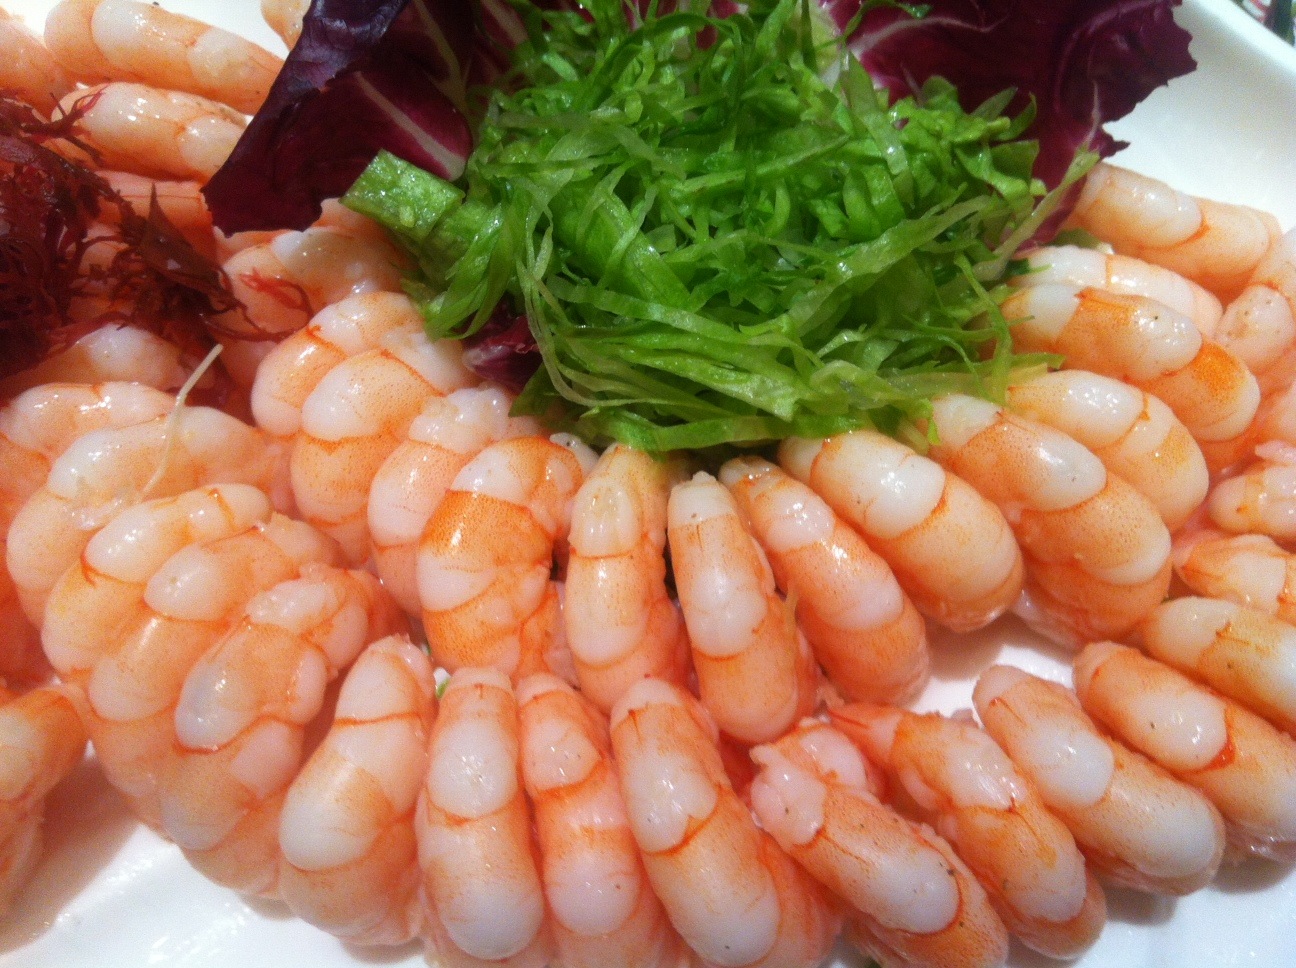 Vietnam shrimp exports to Korea are expected to increase by nearly 30% in 2019